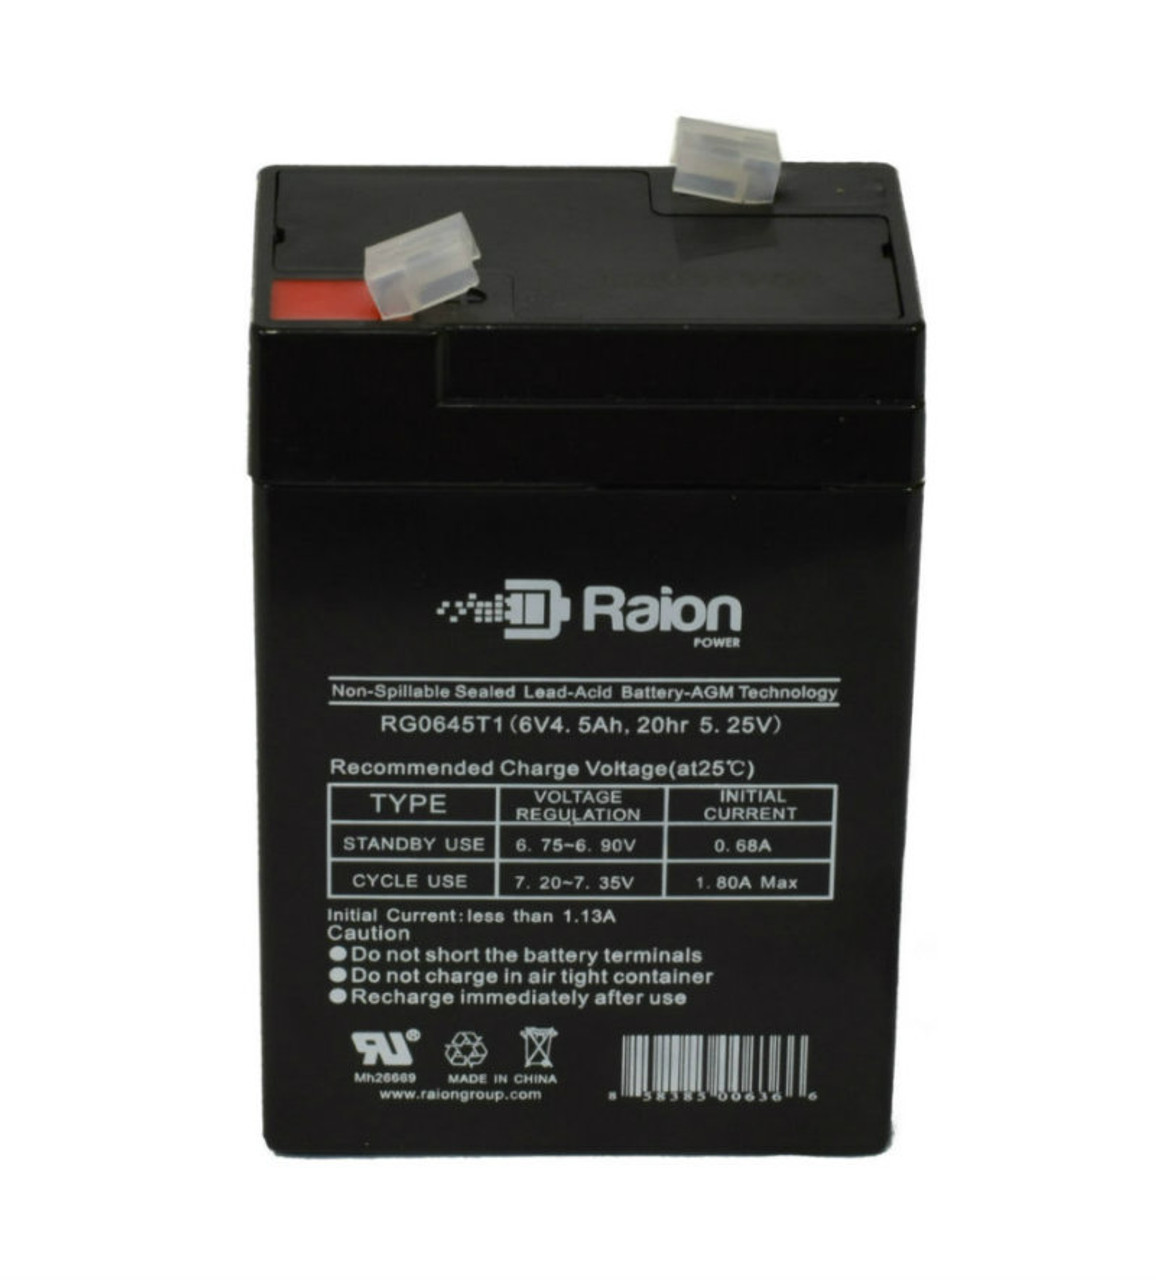 Raion Power RG0645T1 Replacement Battery Cartridge for FirstPower FP640B